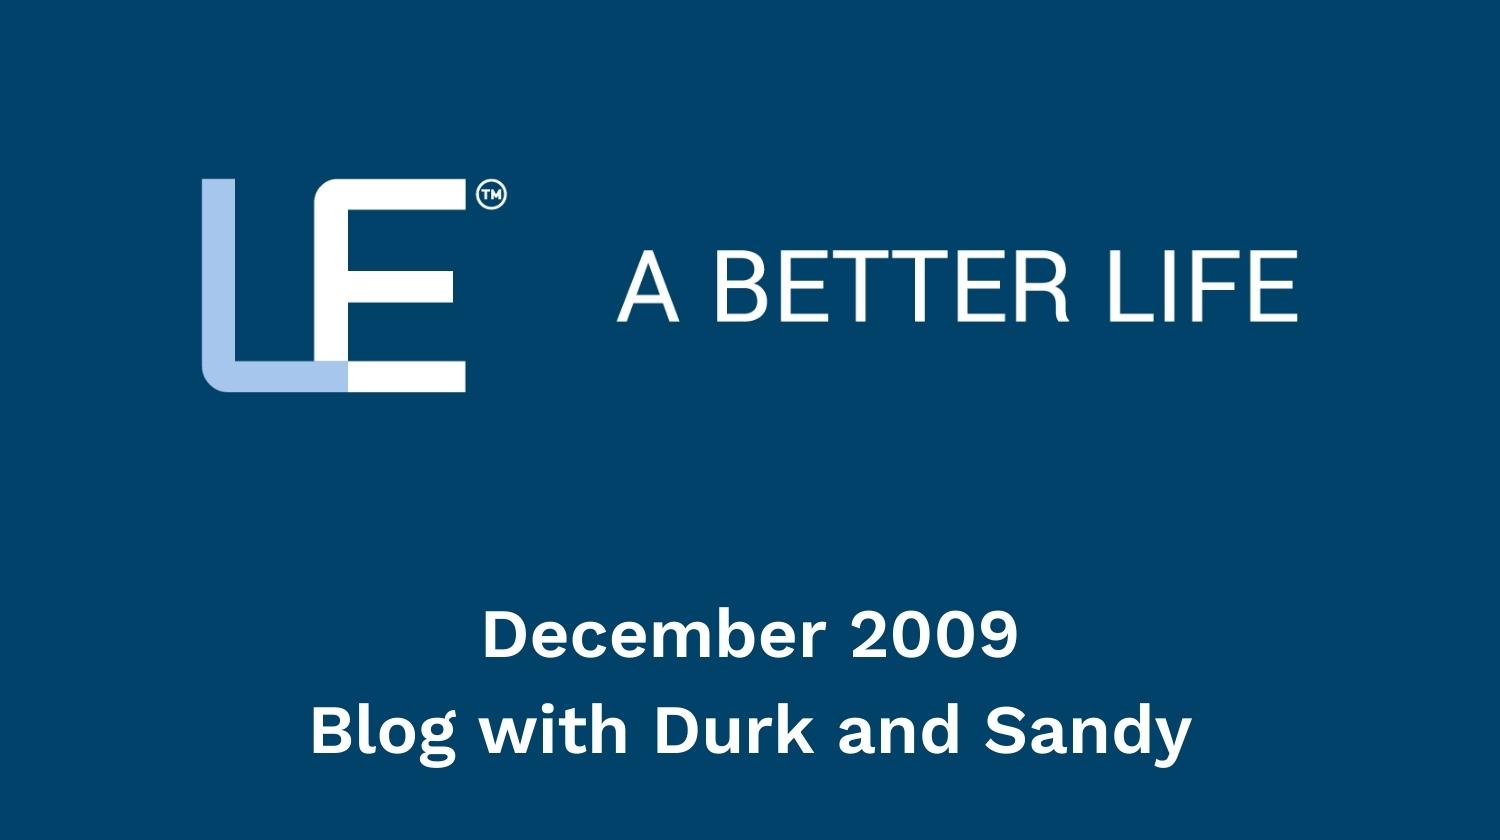 December 2009 Blog with Durk and Sandy